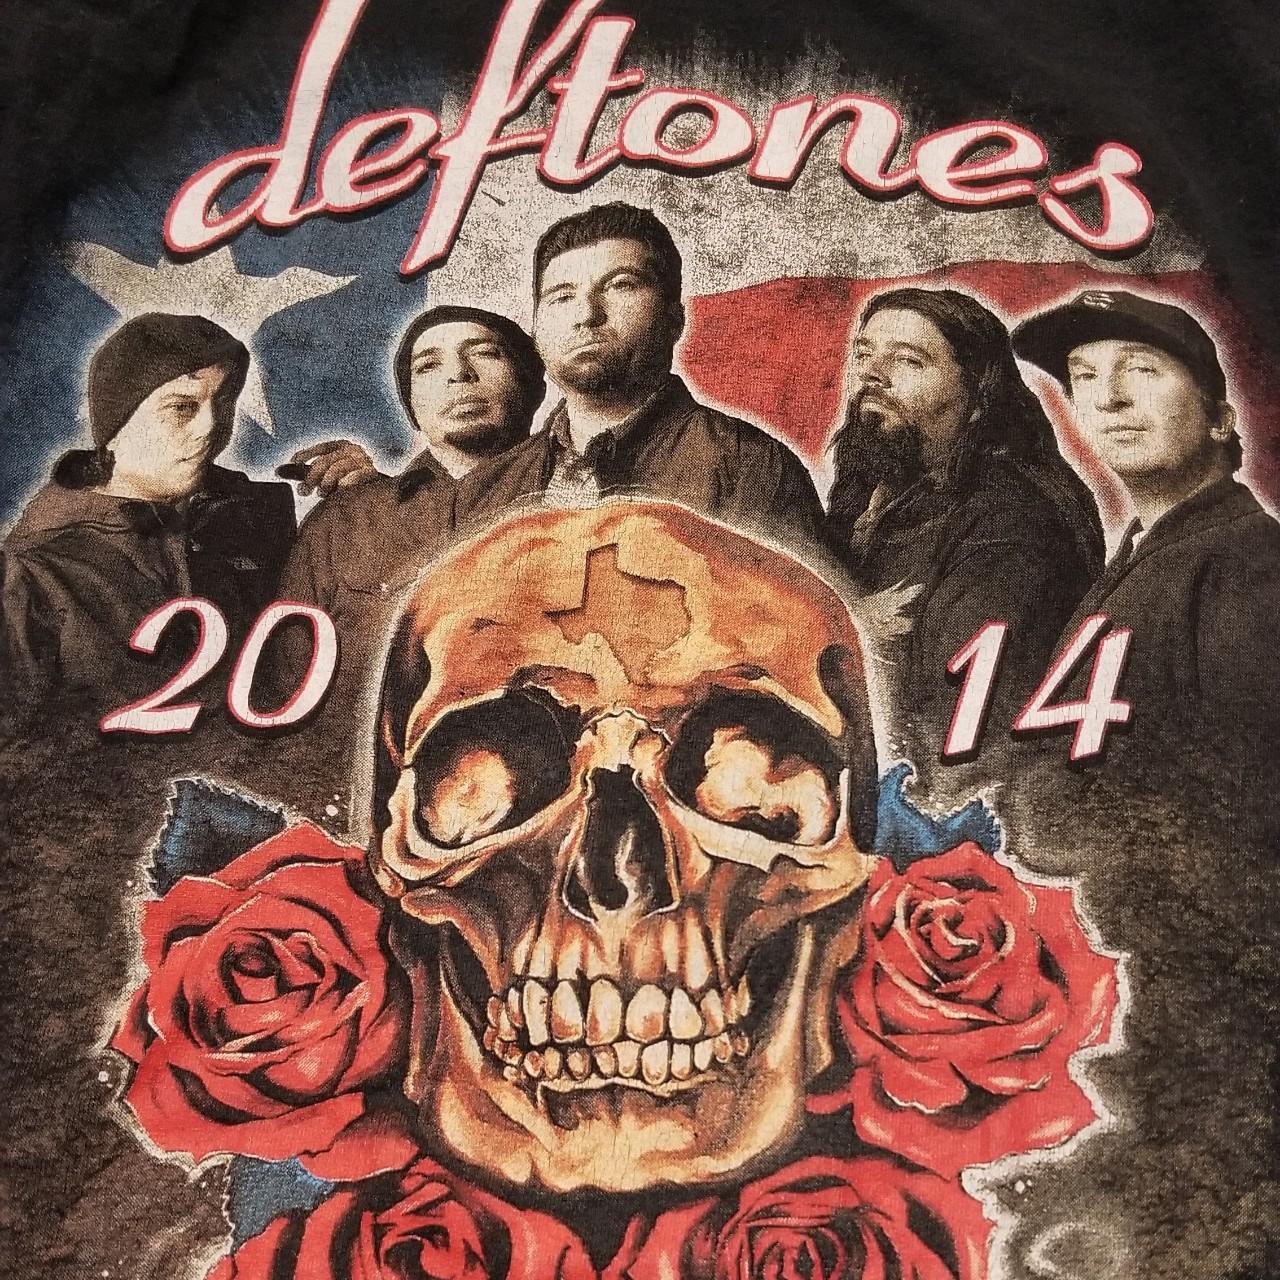 Product Image 4 - deftones tour tee
2014 good condition